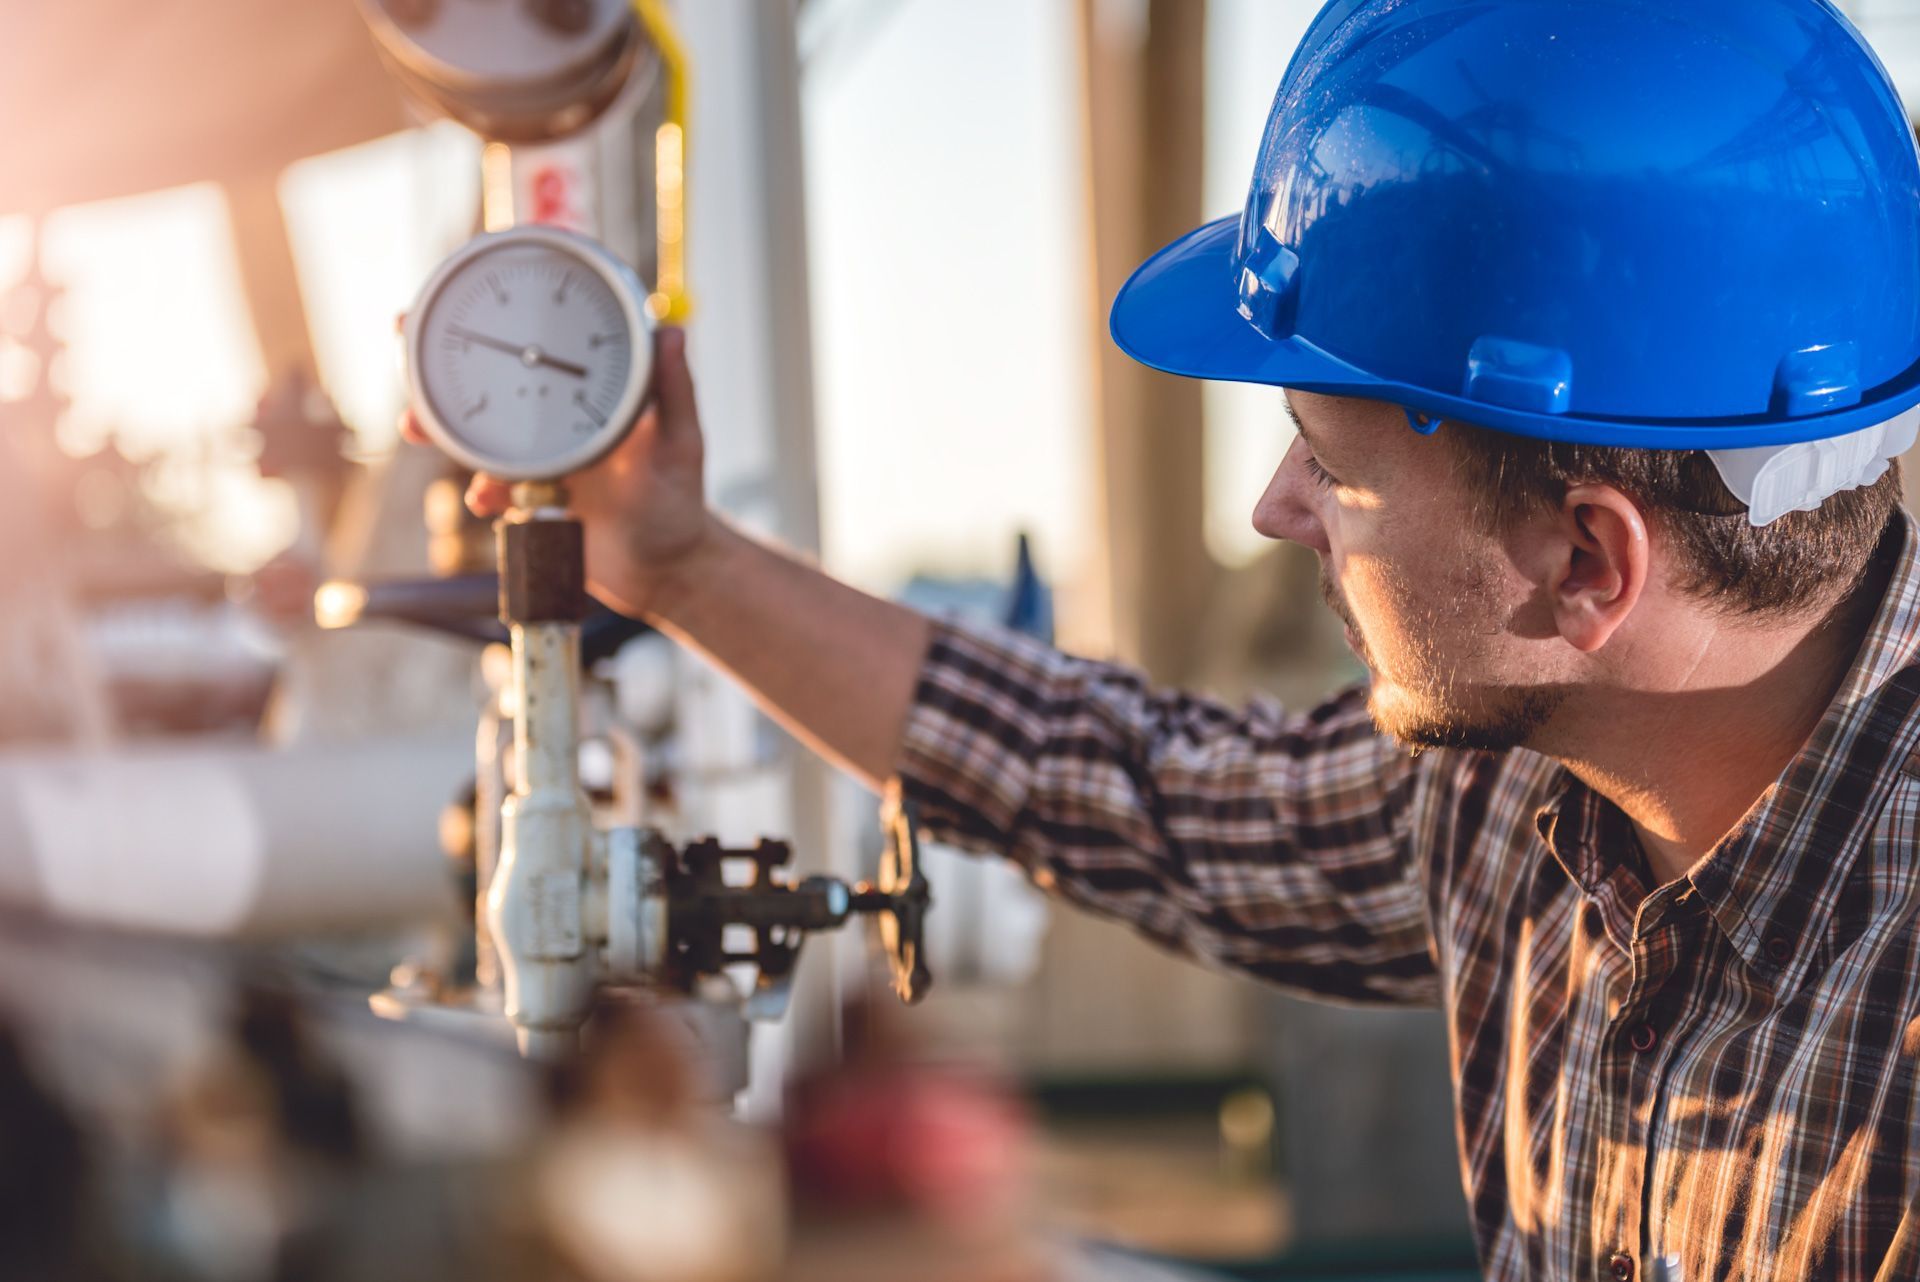 A man wearing a blue hard hat is holding a pressure gauge